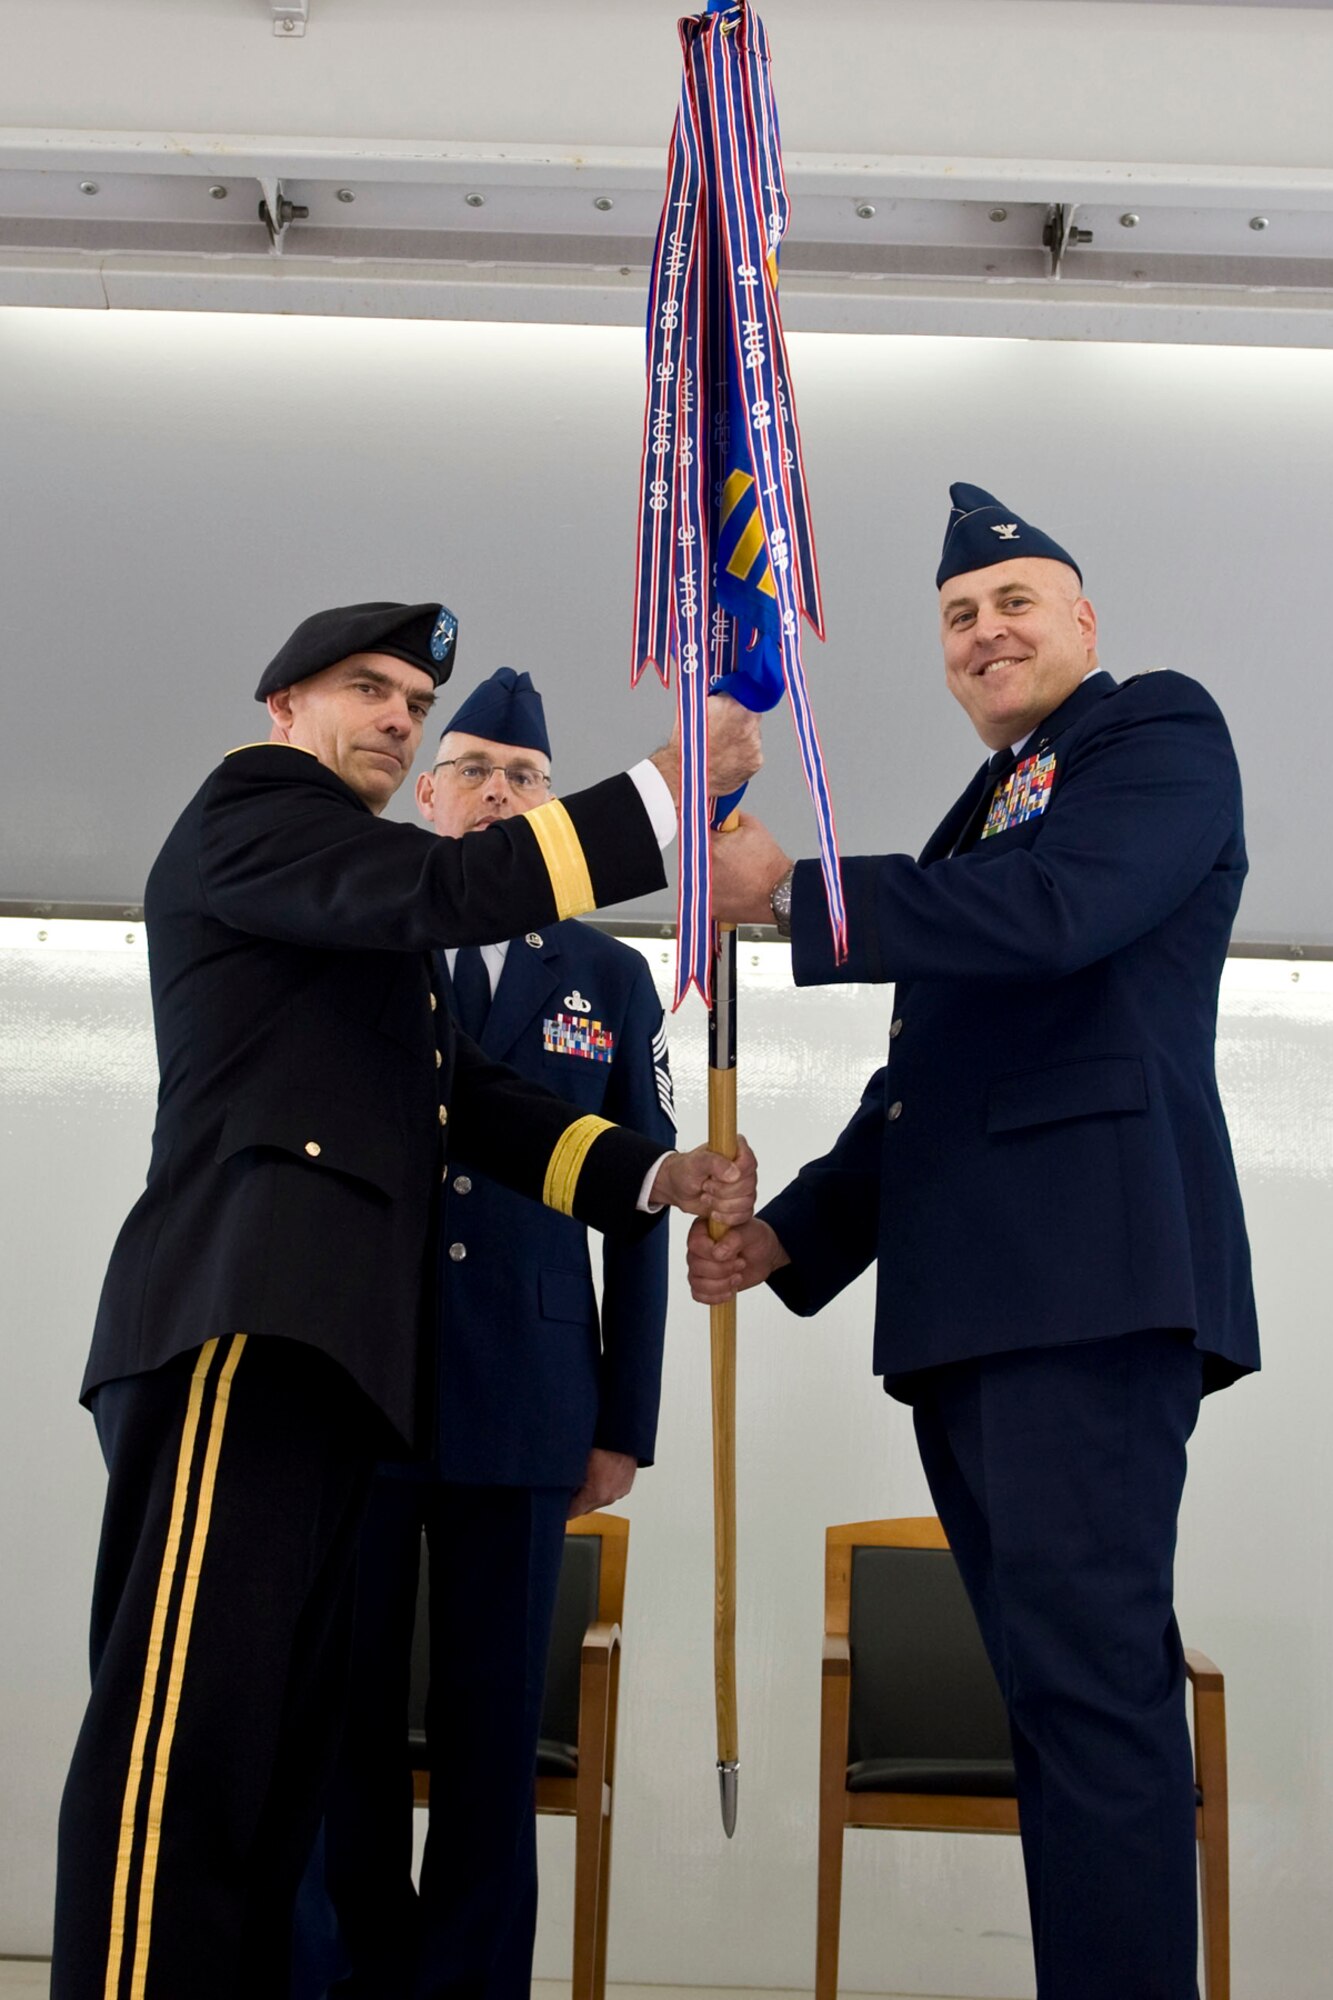 JOINT BASE ELMENDORF-RICHARDSON, Alaska - Col. Donald S. Wenke, the new commander of the 176th Wing, Alaska Air National Guard, accepts the wing guidon from Maj. Gen. Thomas H. Katkus, commander of the Alaska National Guard, during the wing's change of command ceremony Sept. 18, 2011. Wenke assumed command of the wing from Brig. Gen. Charles E. Foster, who has served as the wing commander since 2008. Alaska Air National Guard photo by Master Shannon Oleson.